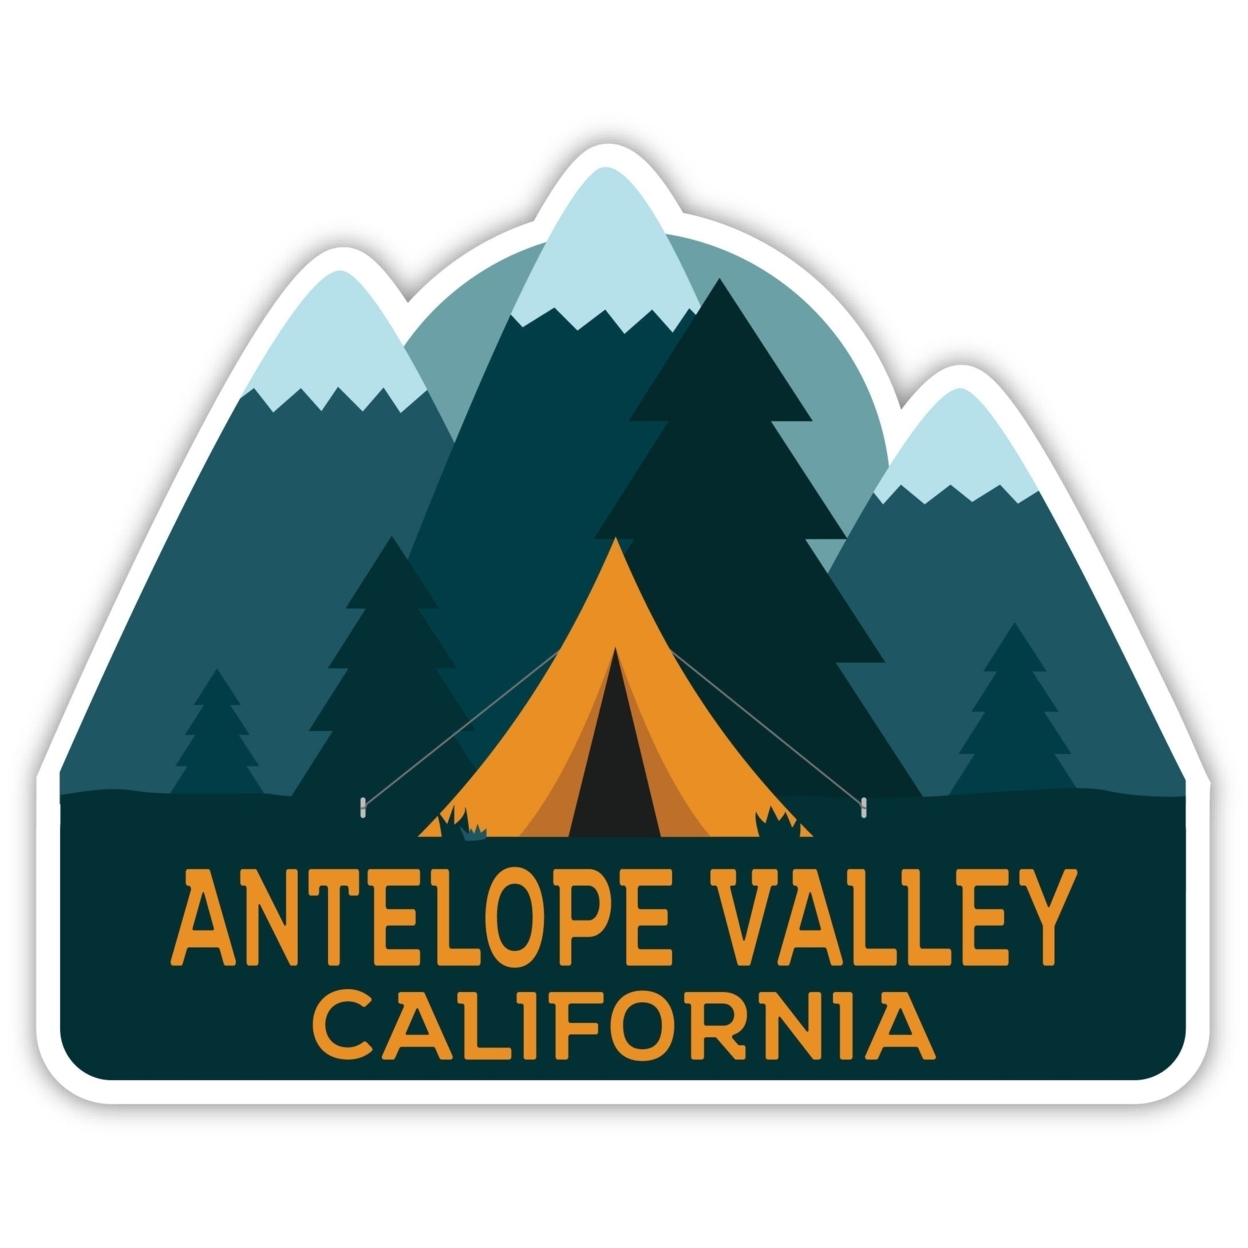 Antelope Valley California Souvenir Decorative Stickers (Choose Theme And Size) - Single Unit, 10-Inch, Tent